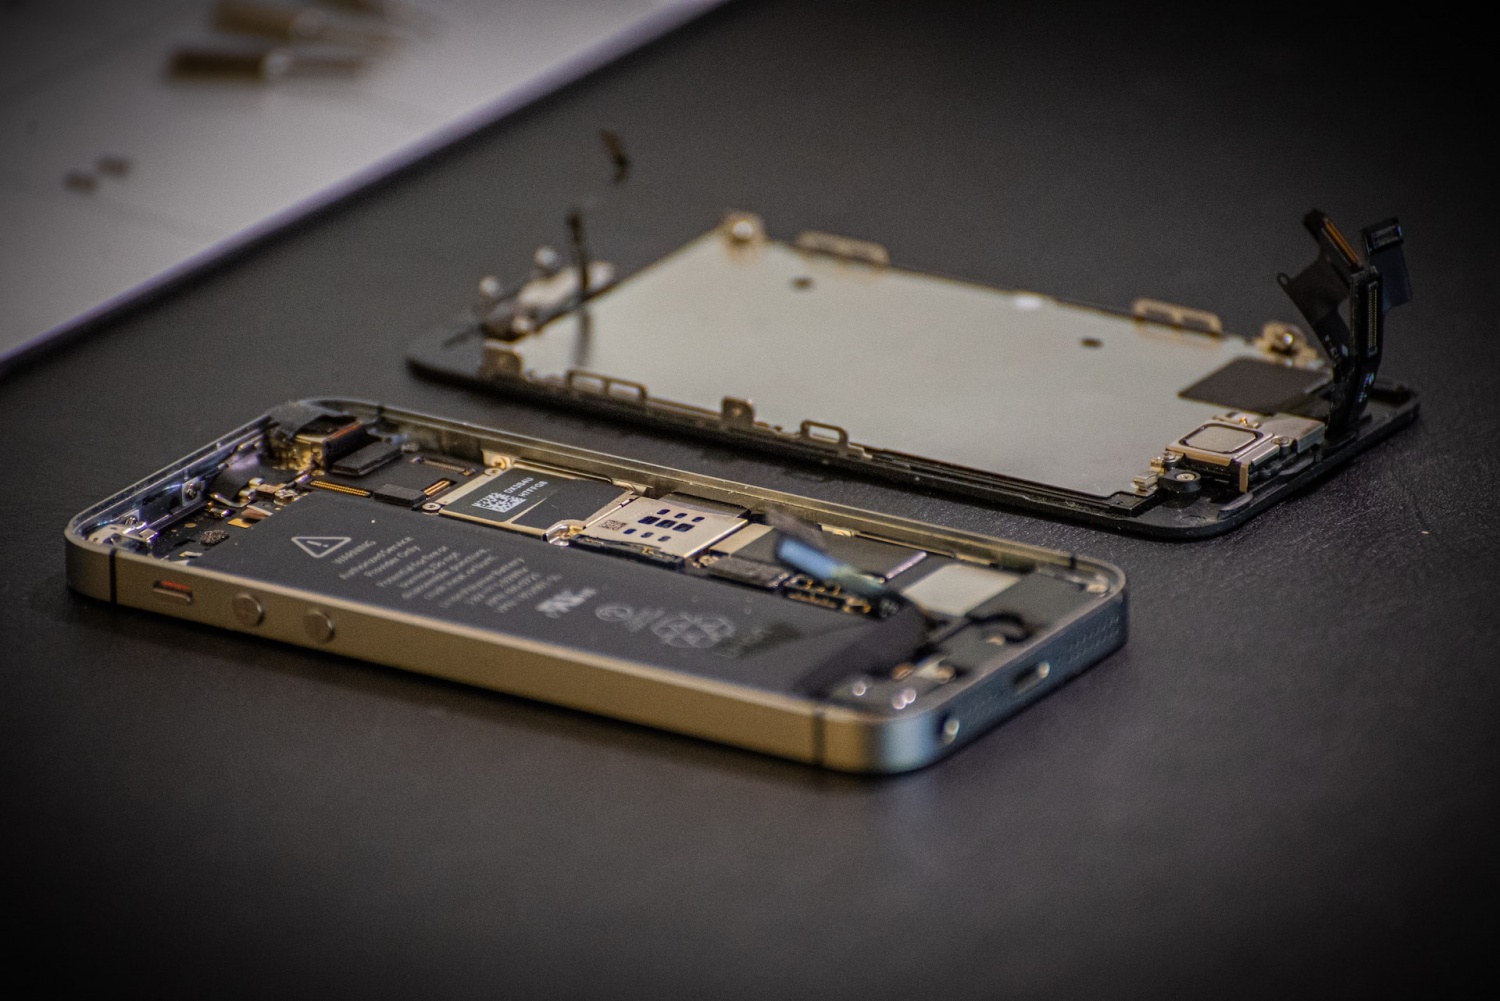 Apple Backs Joe Biden's Right-to-Repair Law, Expands Access to Repair Parts and Tools